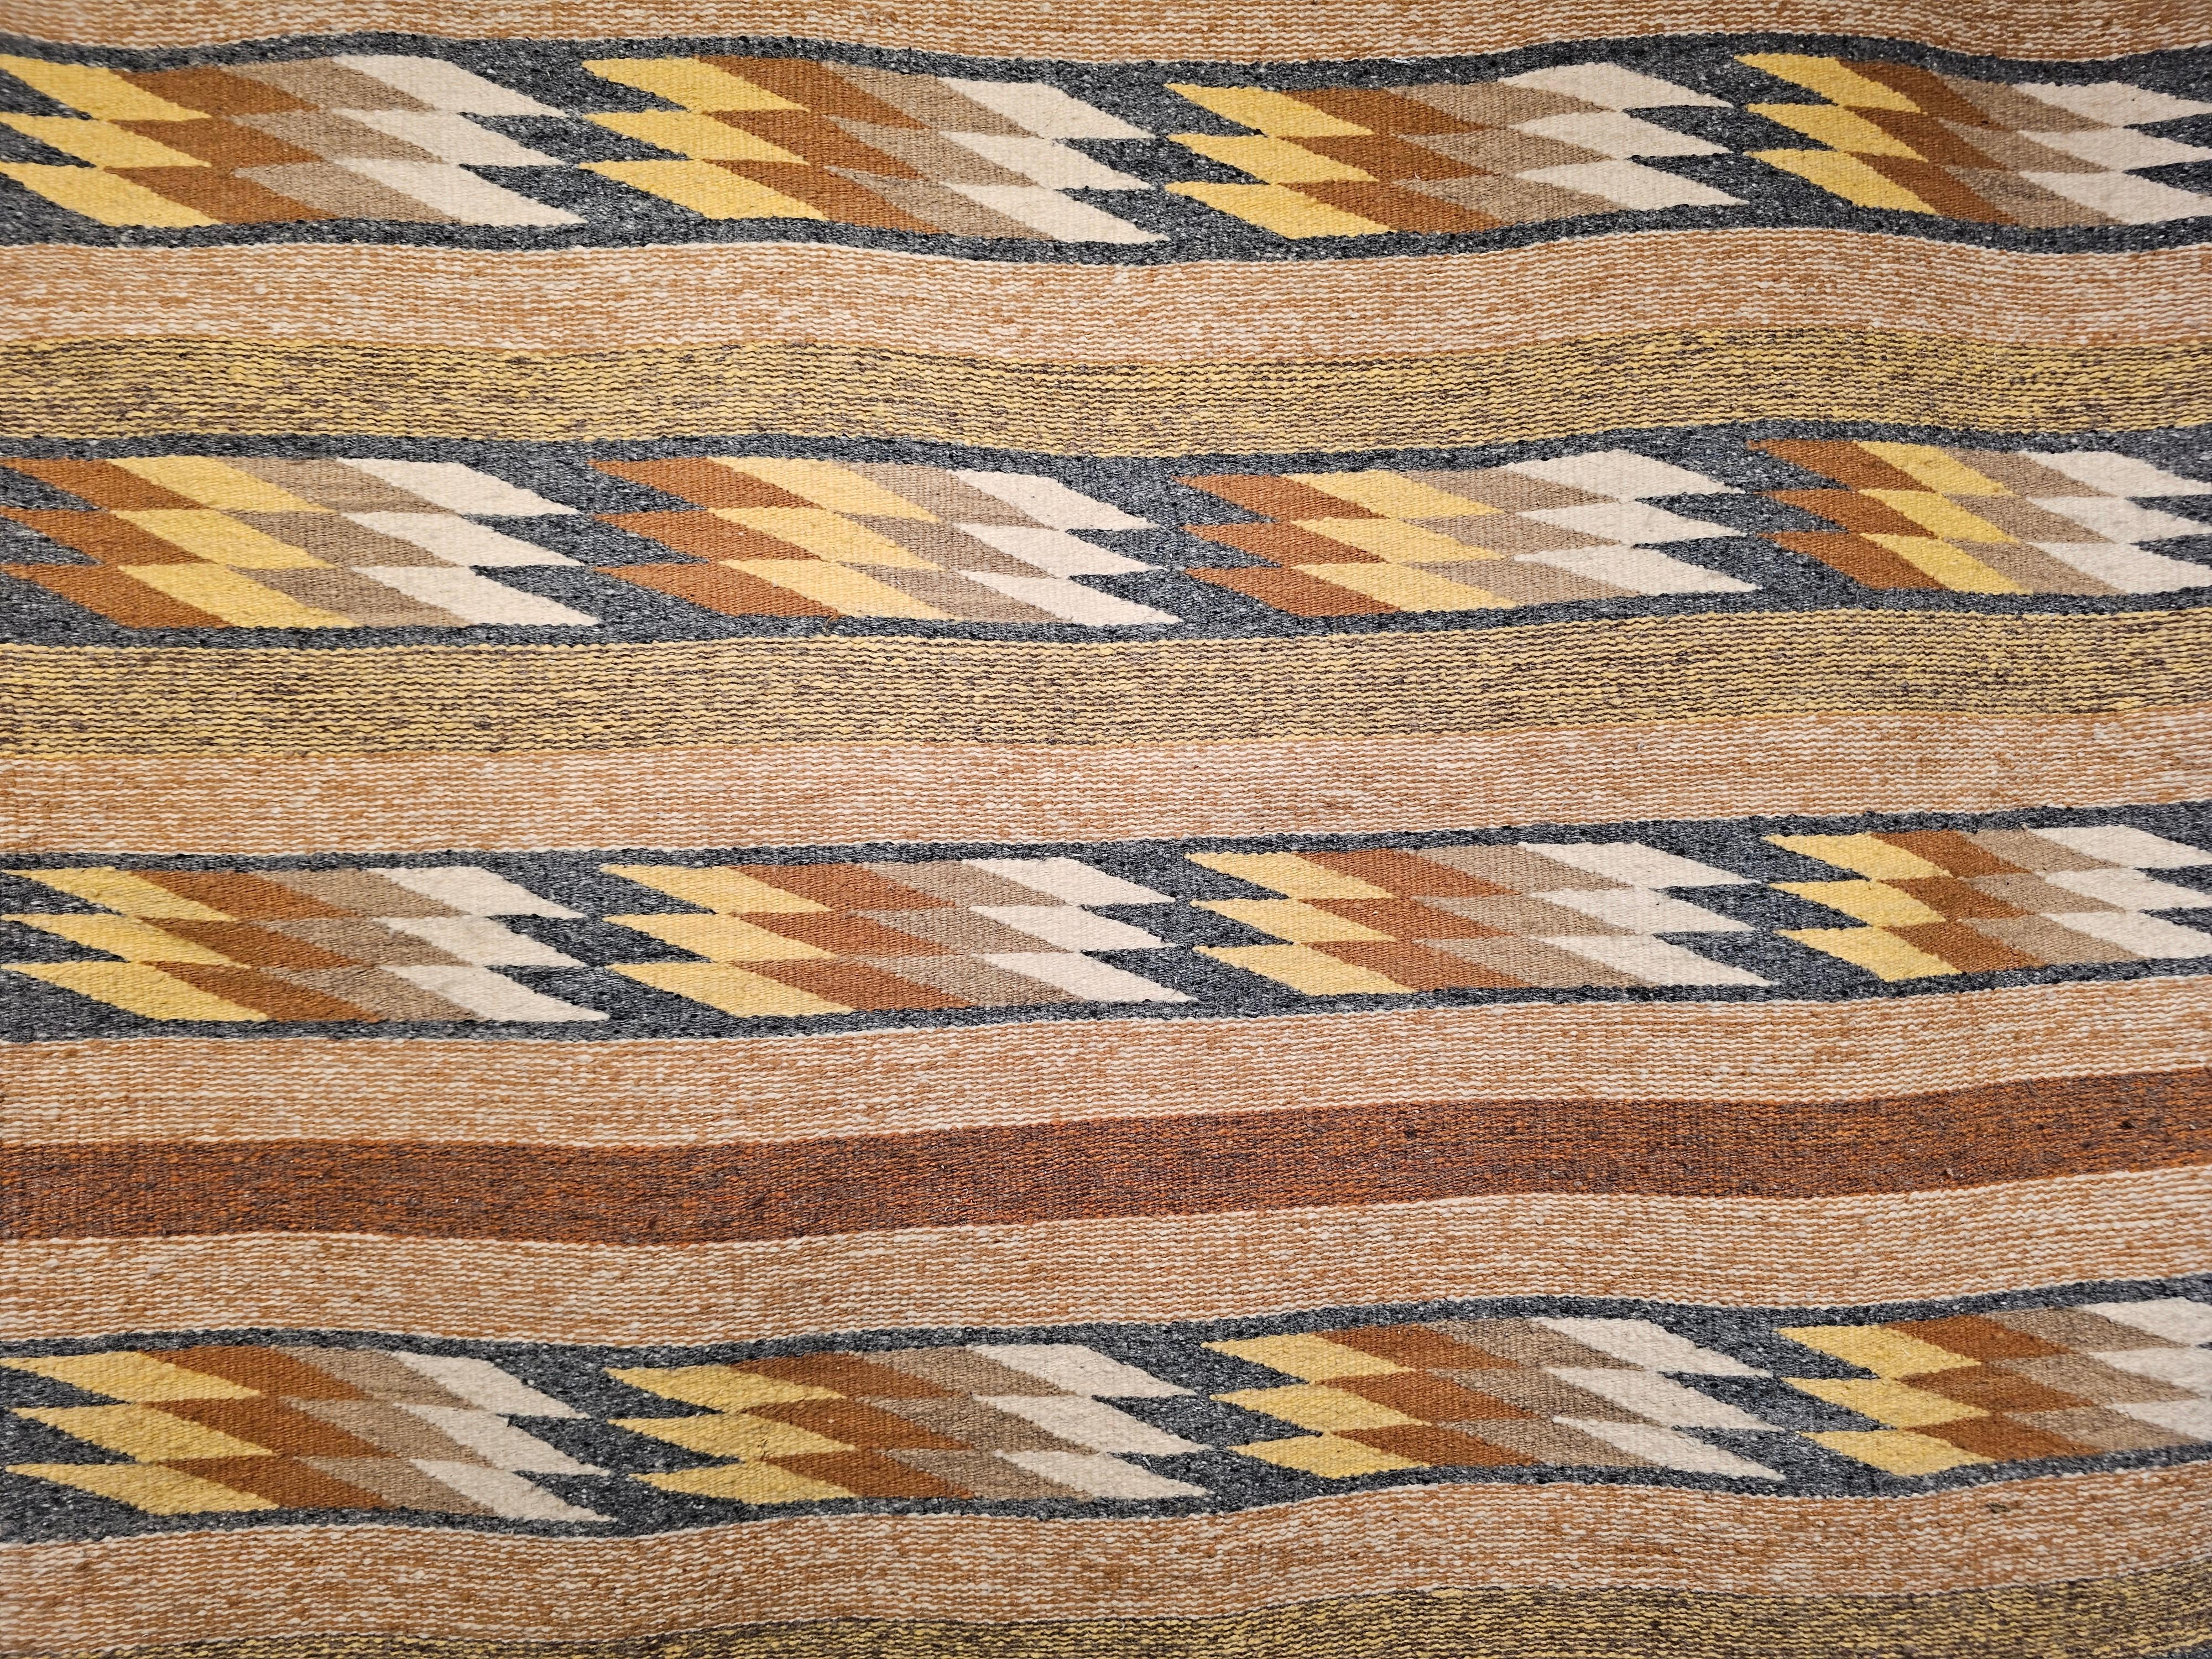  Extremely rare and very desirable square size vintage native American Navajo rug hand-woven in the Southwestern part of the United States in the 3rd quarter of the 1900s.   The eye dazzling design pattern in rows separated with solid stripes.   The